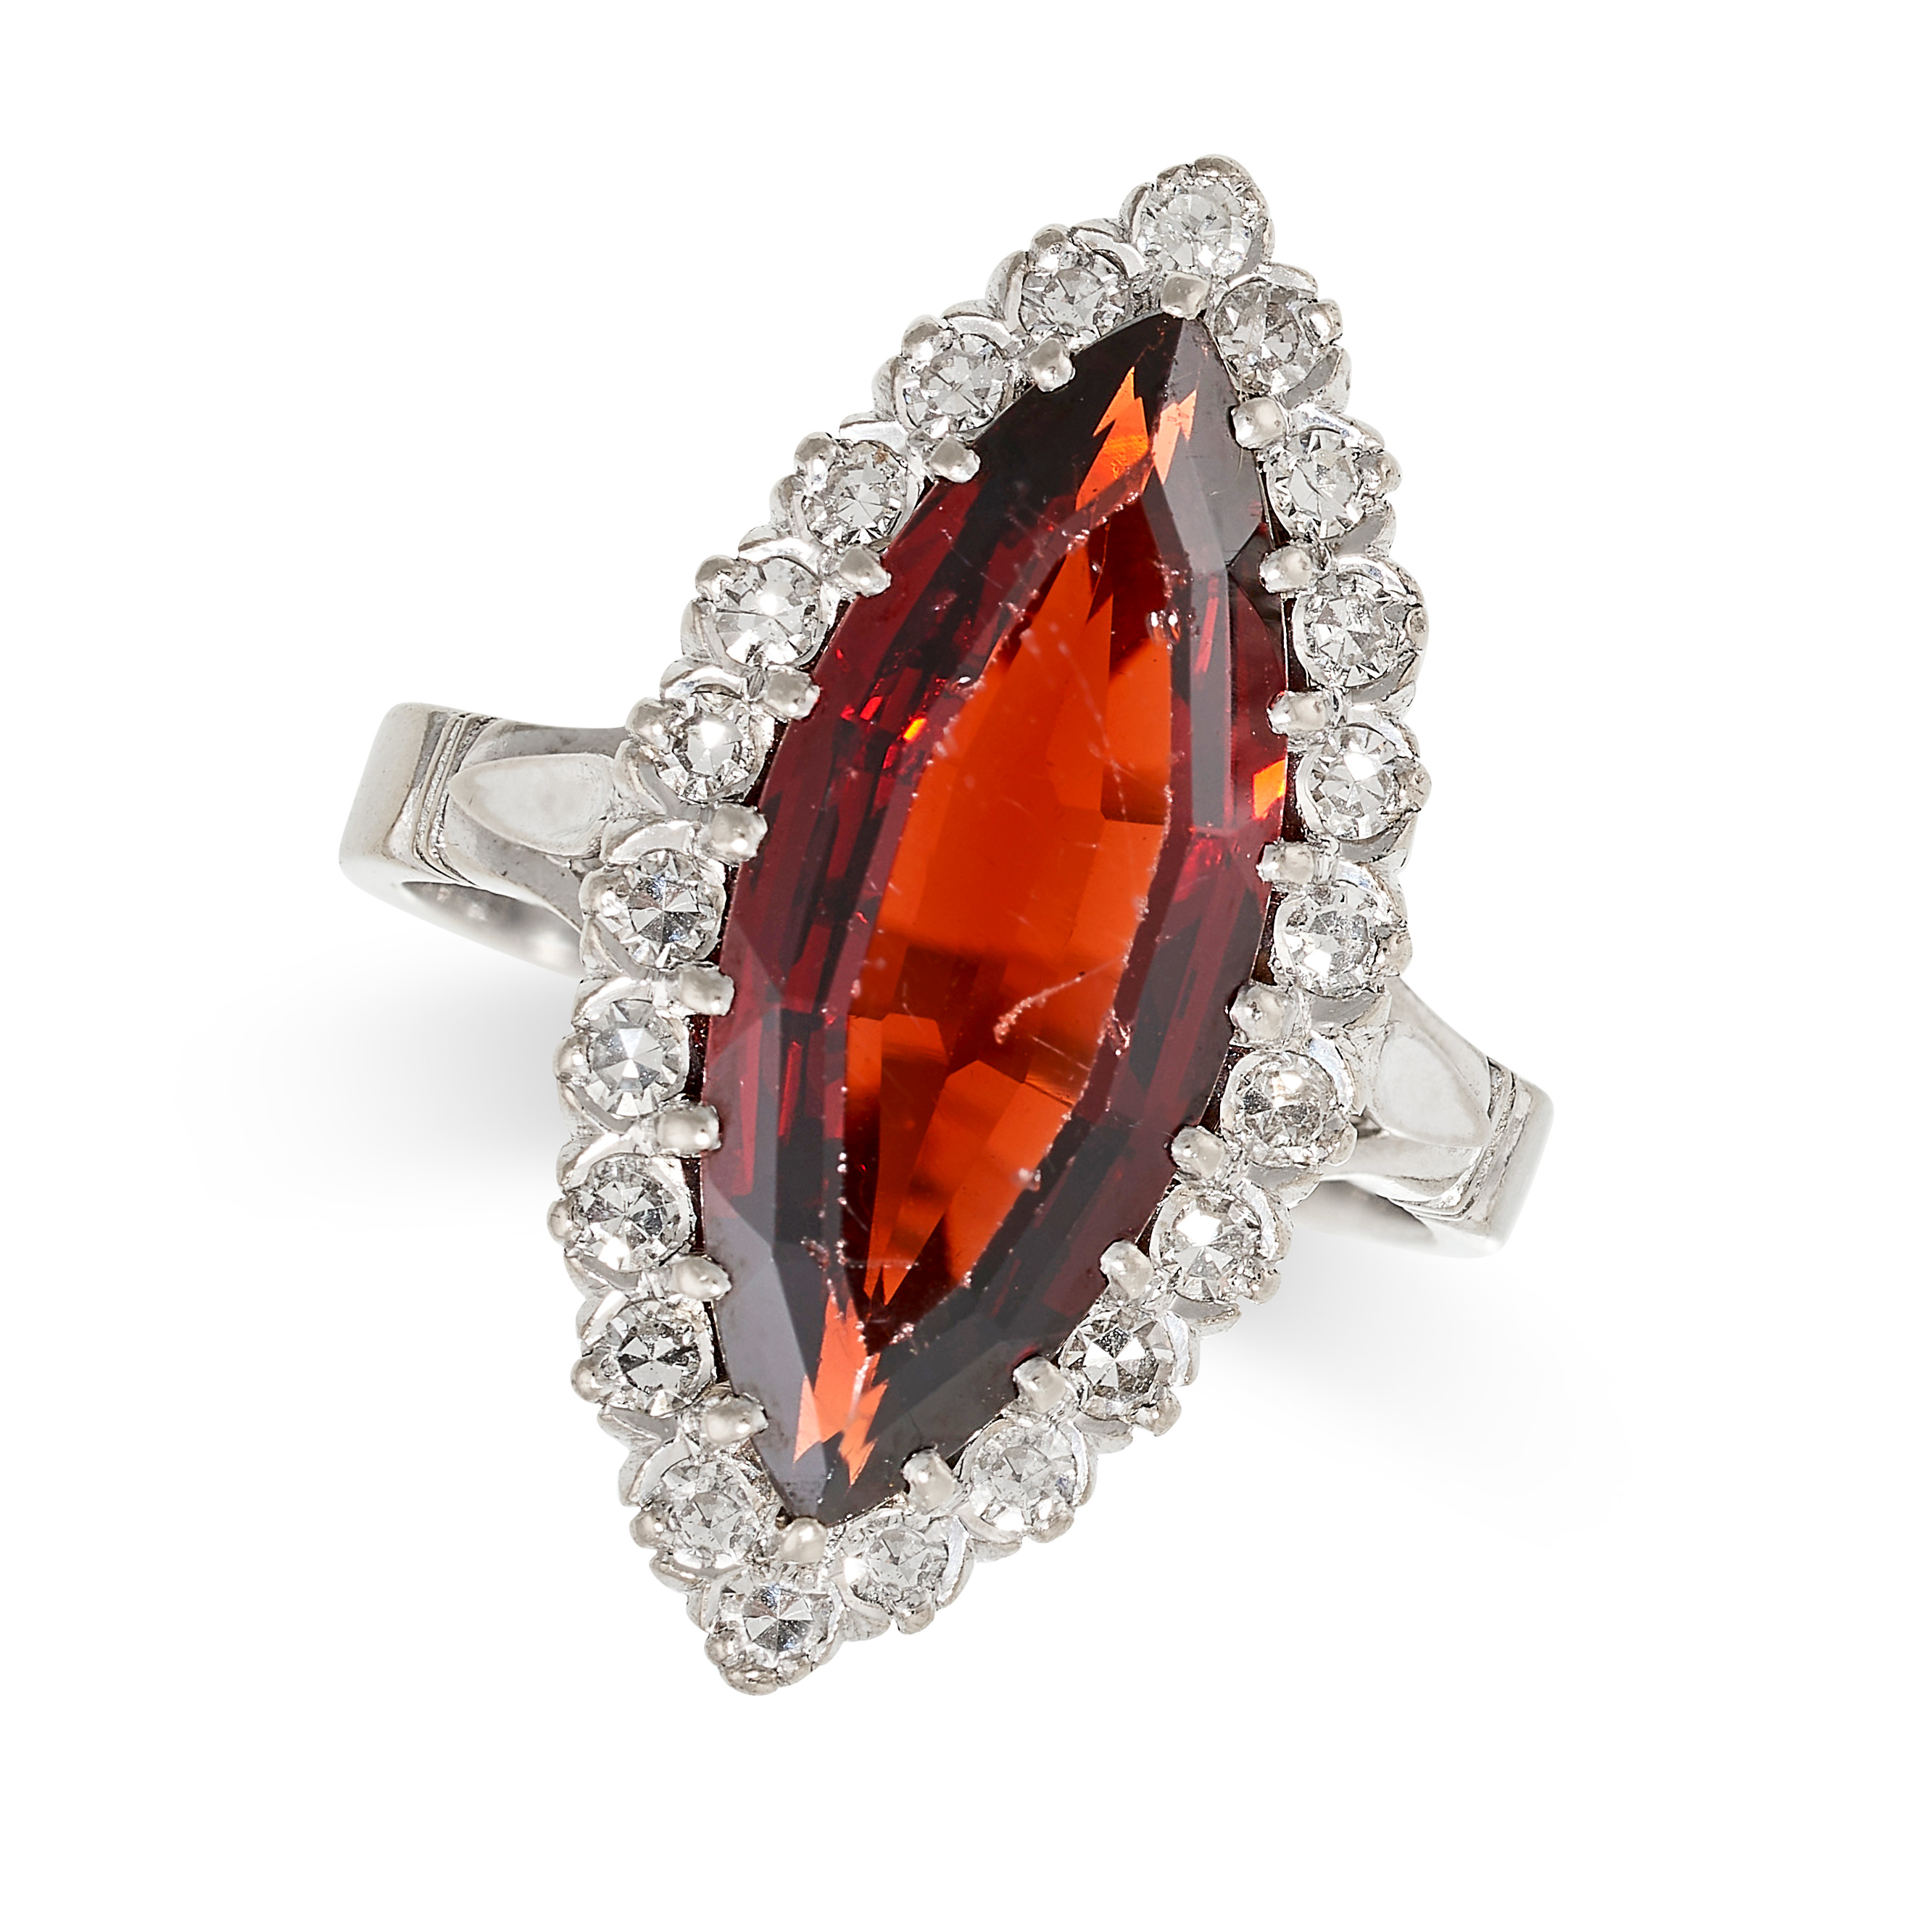 A GARNET AND DIAMOND MARQUISE RING set with a marquise cut garnet in a border of single cut